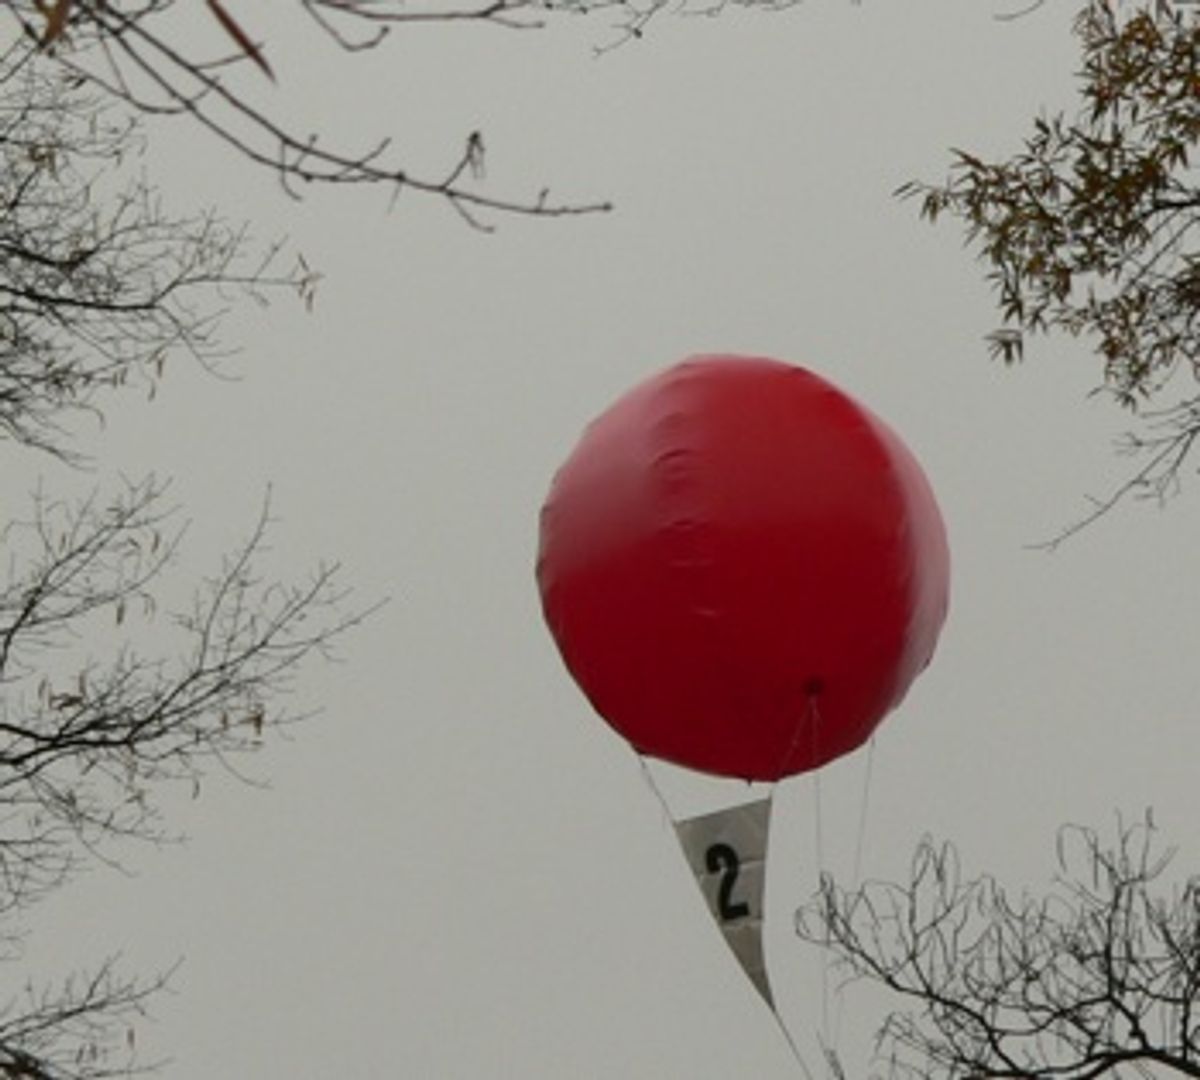 Darpa, the Government Agency With the Best Imagination, Sends Competitors on a Search for Red Balloons